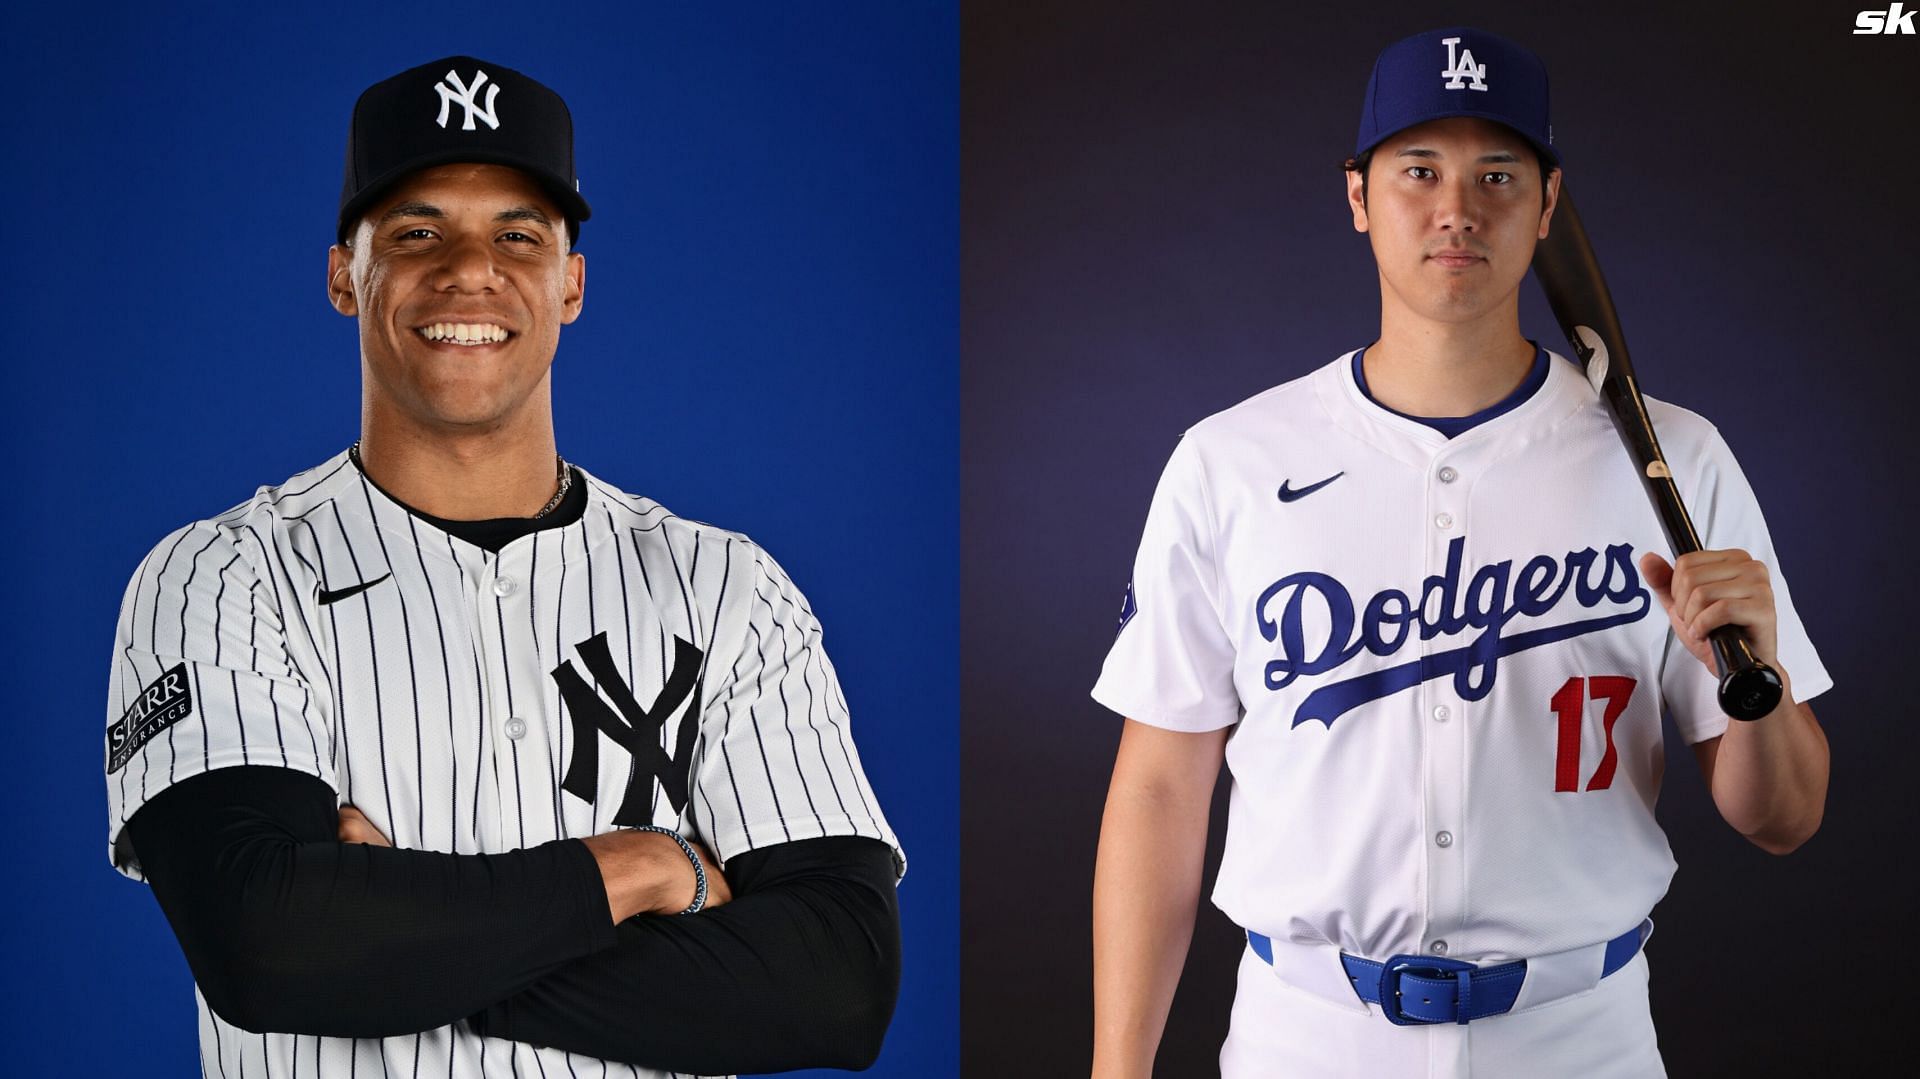 In Photos MLB's spring training uniform causes massive stir with